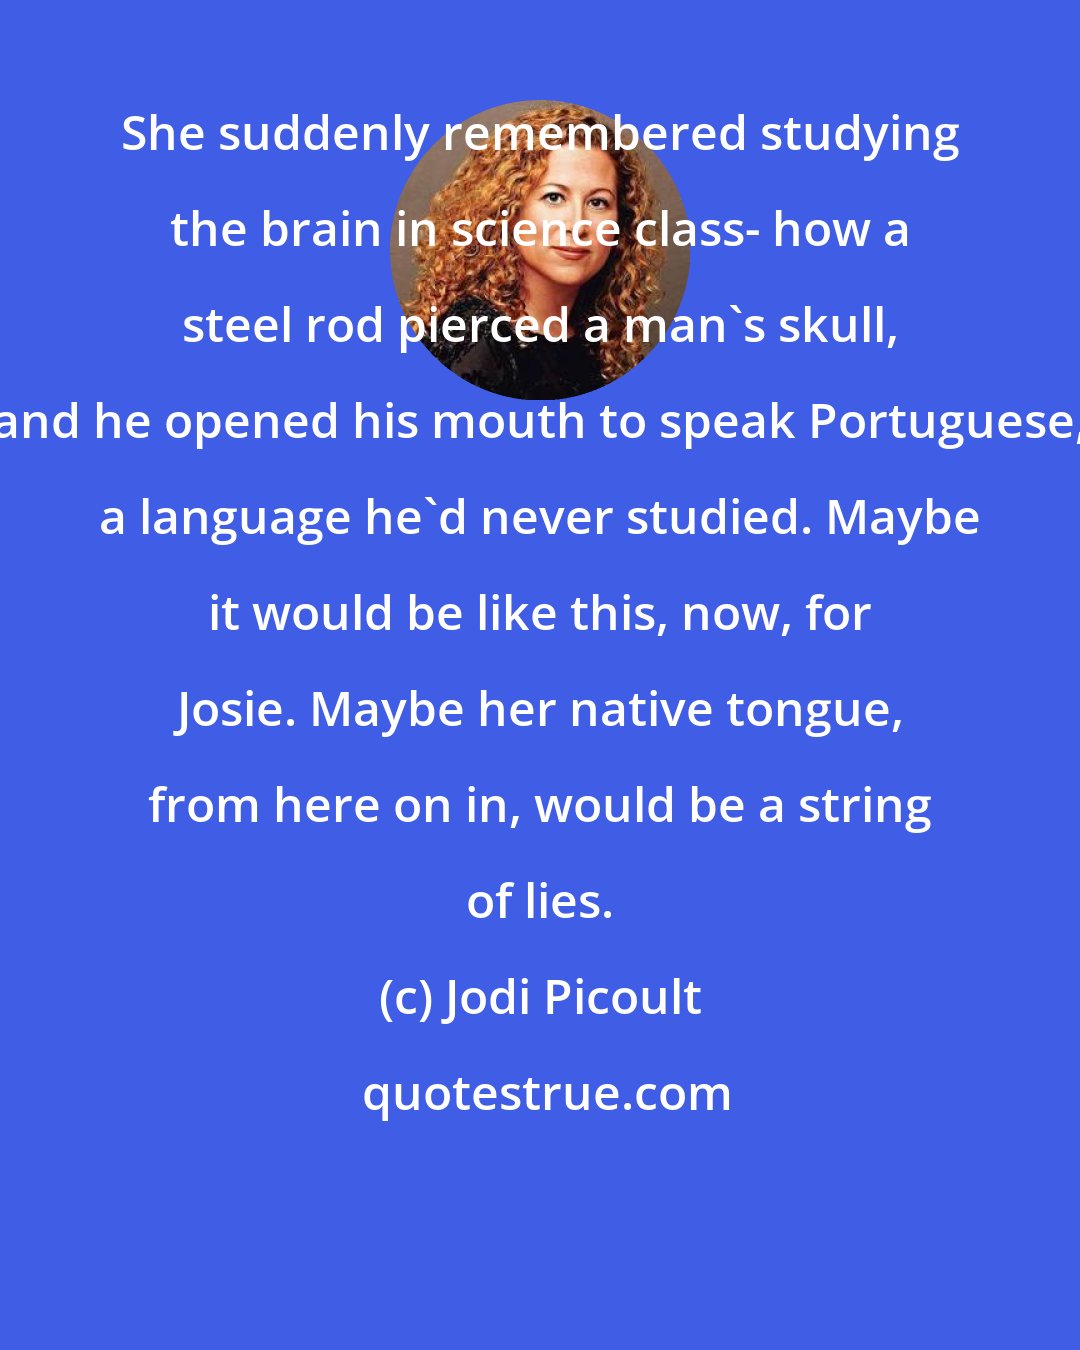 Jodi Picoult: She suddenly remembered studying the brain in science class- how a steel rod pierced a man's skull, and he opened his mouth to speak Portuguese, a language he'd never studied. Maybe it would be like this, now, for Josie. Maybe her native tongue, from here on in, would be a string of lies.